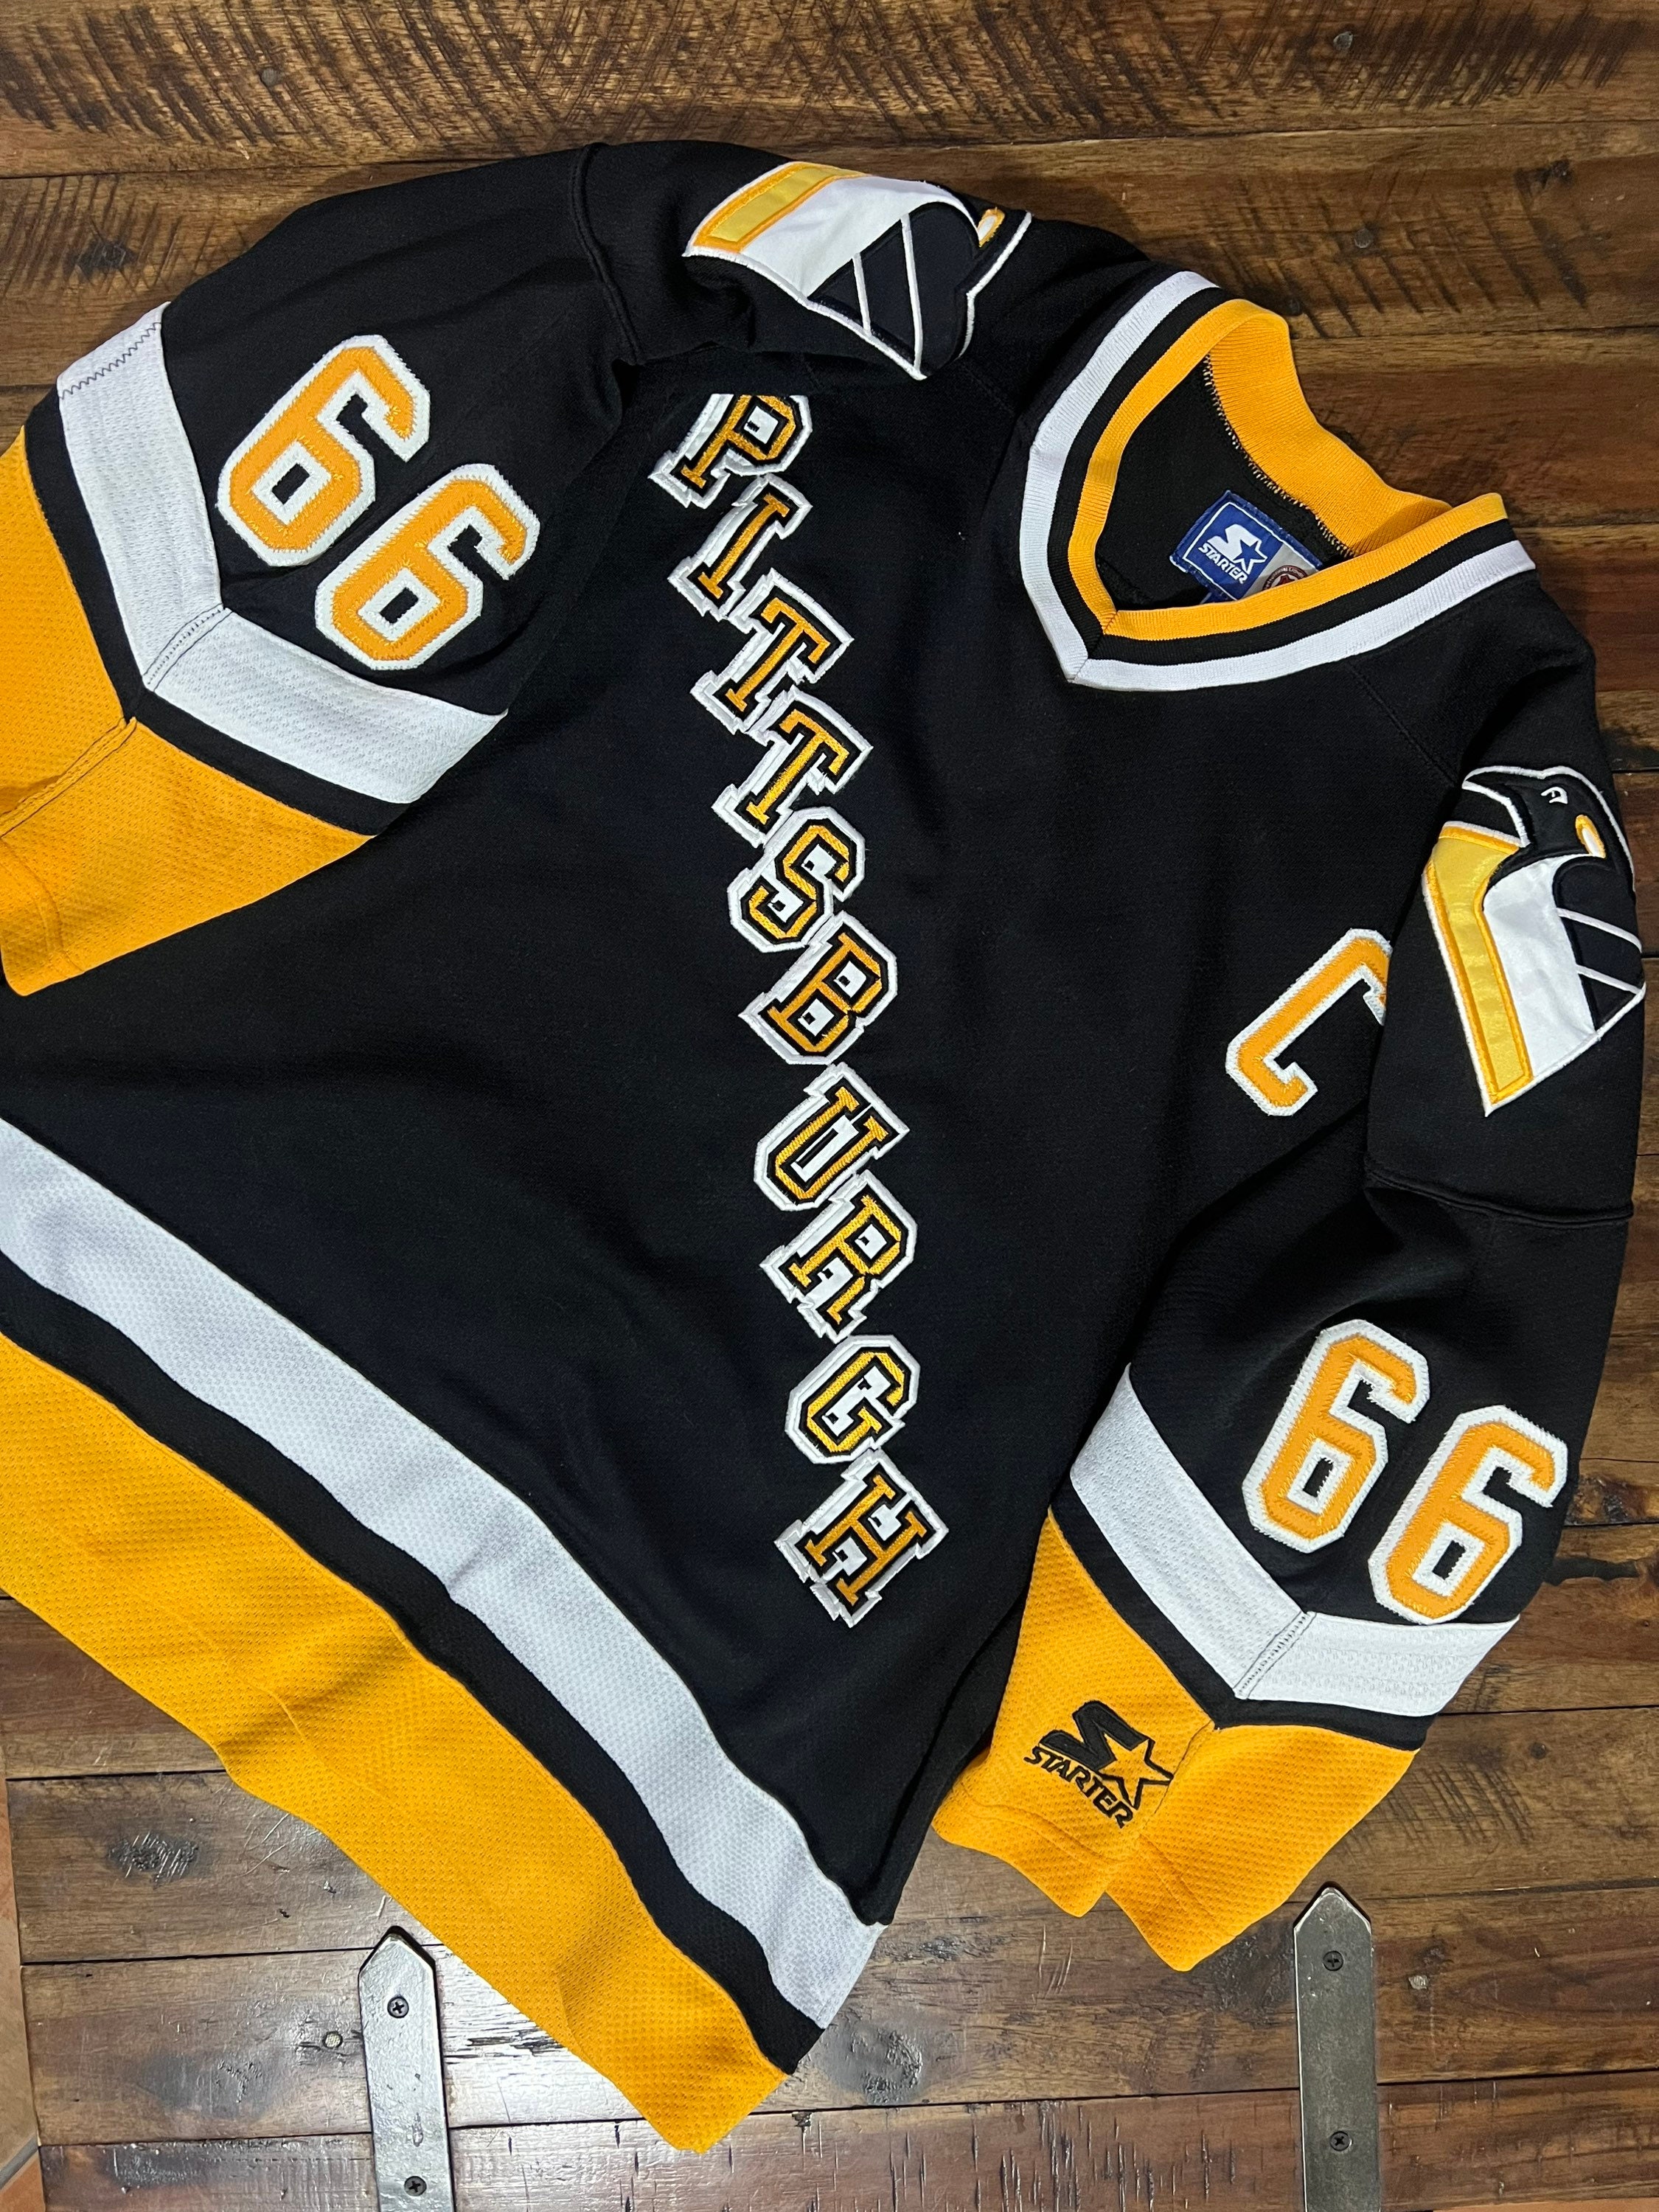 Which Lemieux jersey should I get customized with the 1992 Stanley